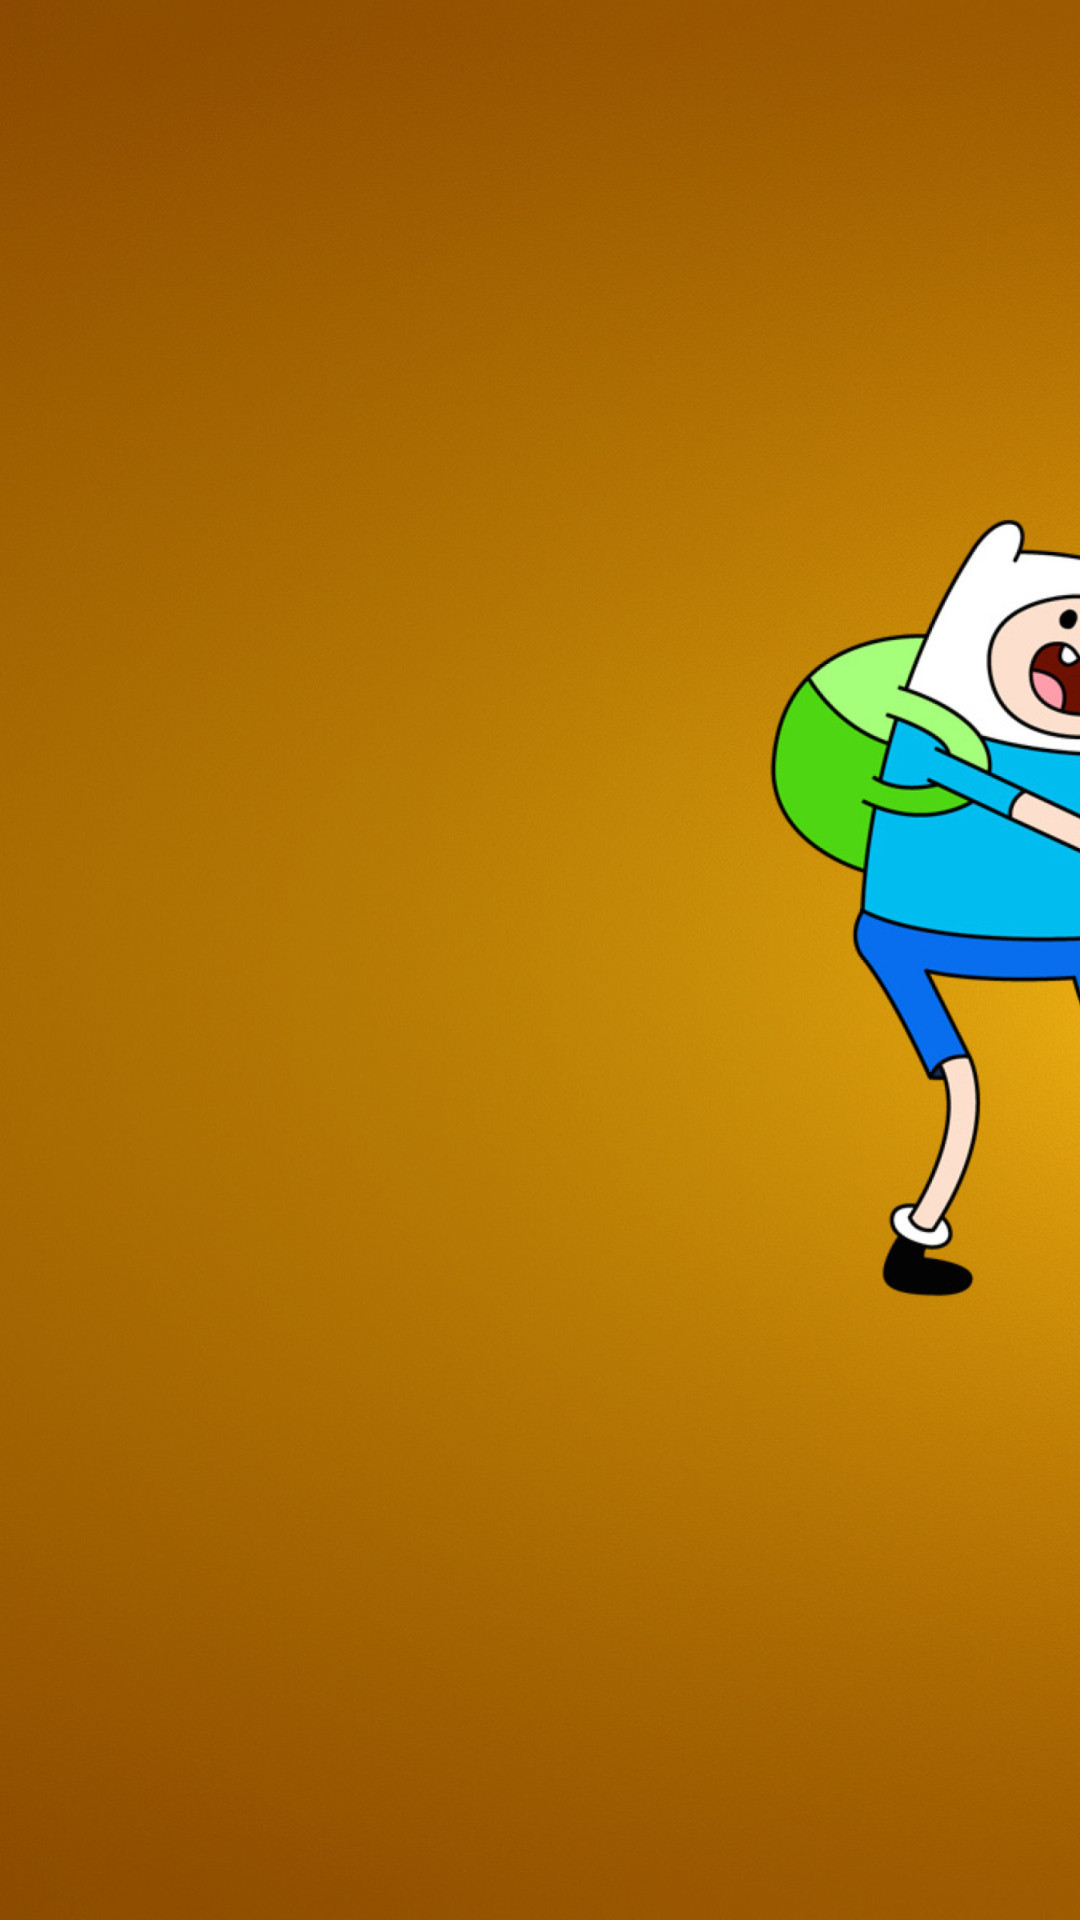 Adventure Time Treasury - Adventure Time Hd Wallpaper Android , HD Wallpaper & Backgrounds